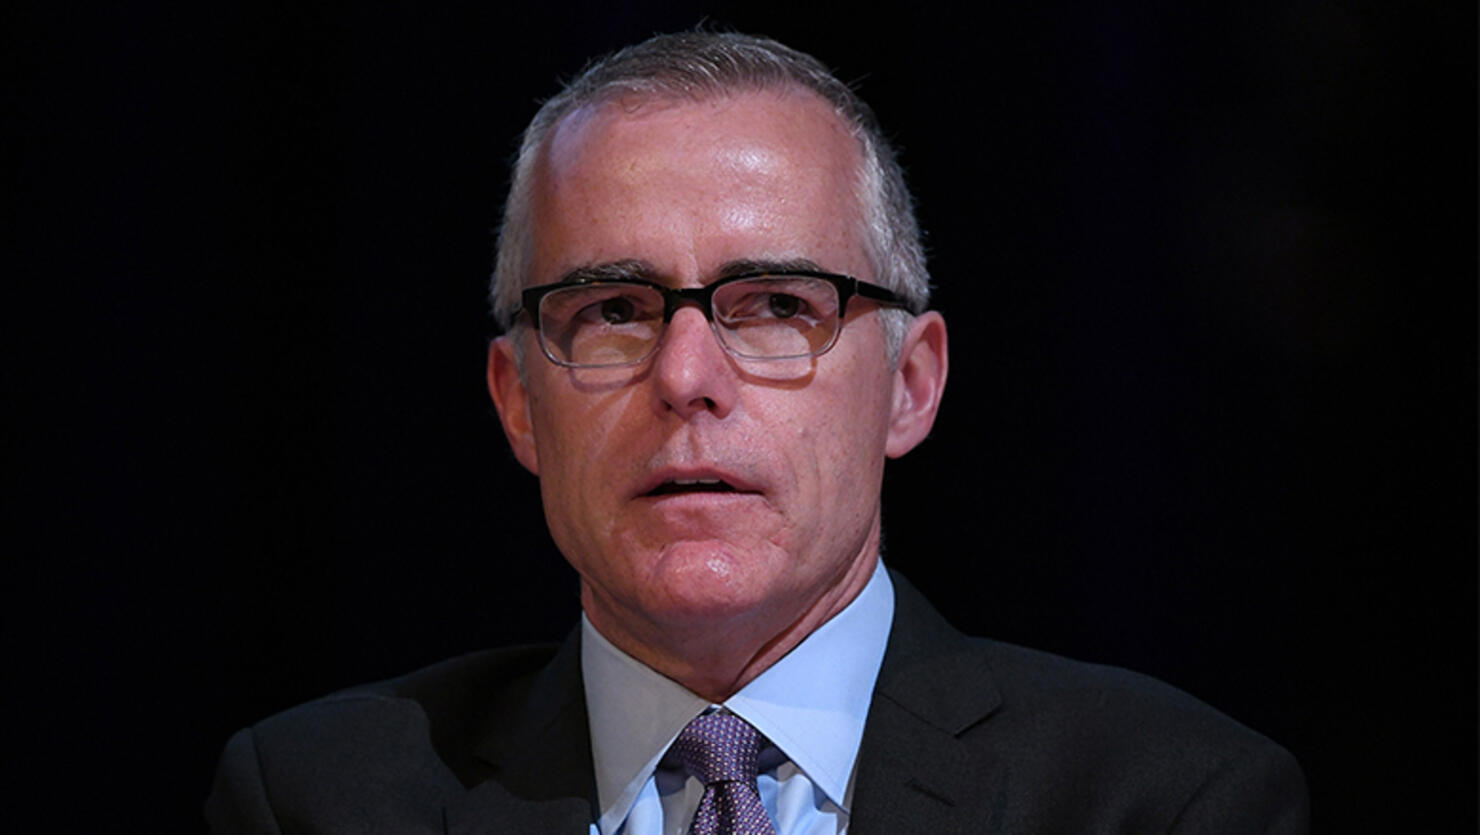 Andrew McCabe Signs Copies Of His New Book "The Threat: How The FBI Protects America In The Age Of Terror And Trump"